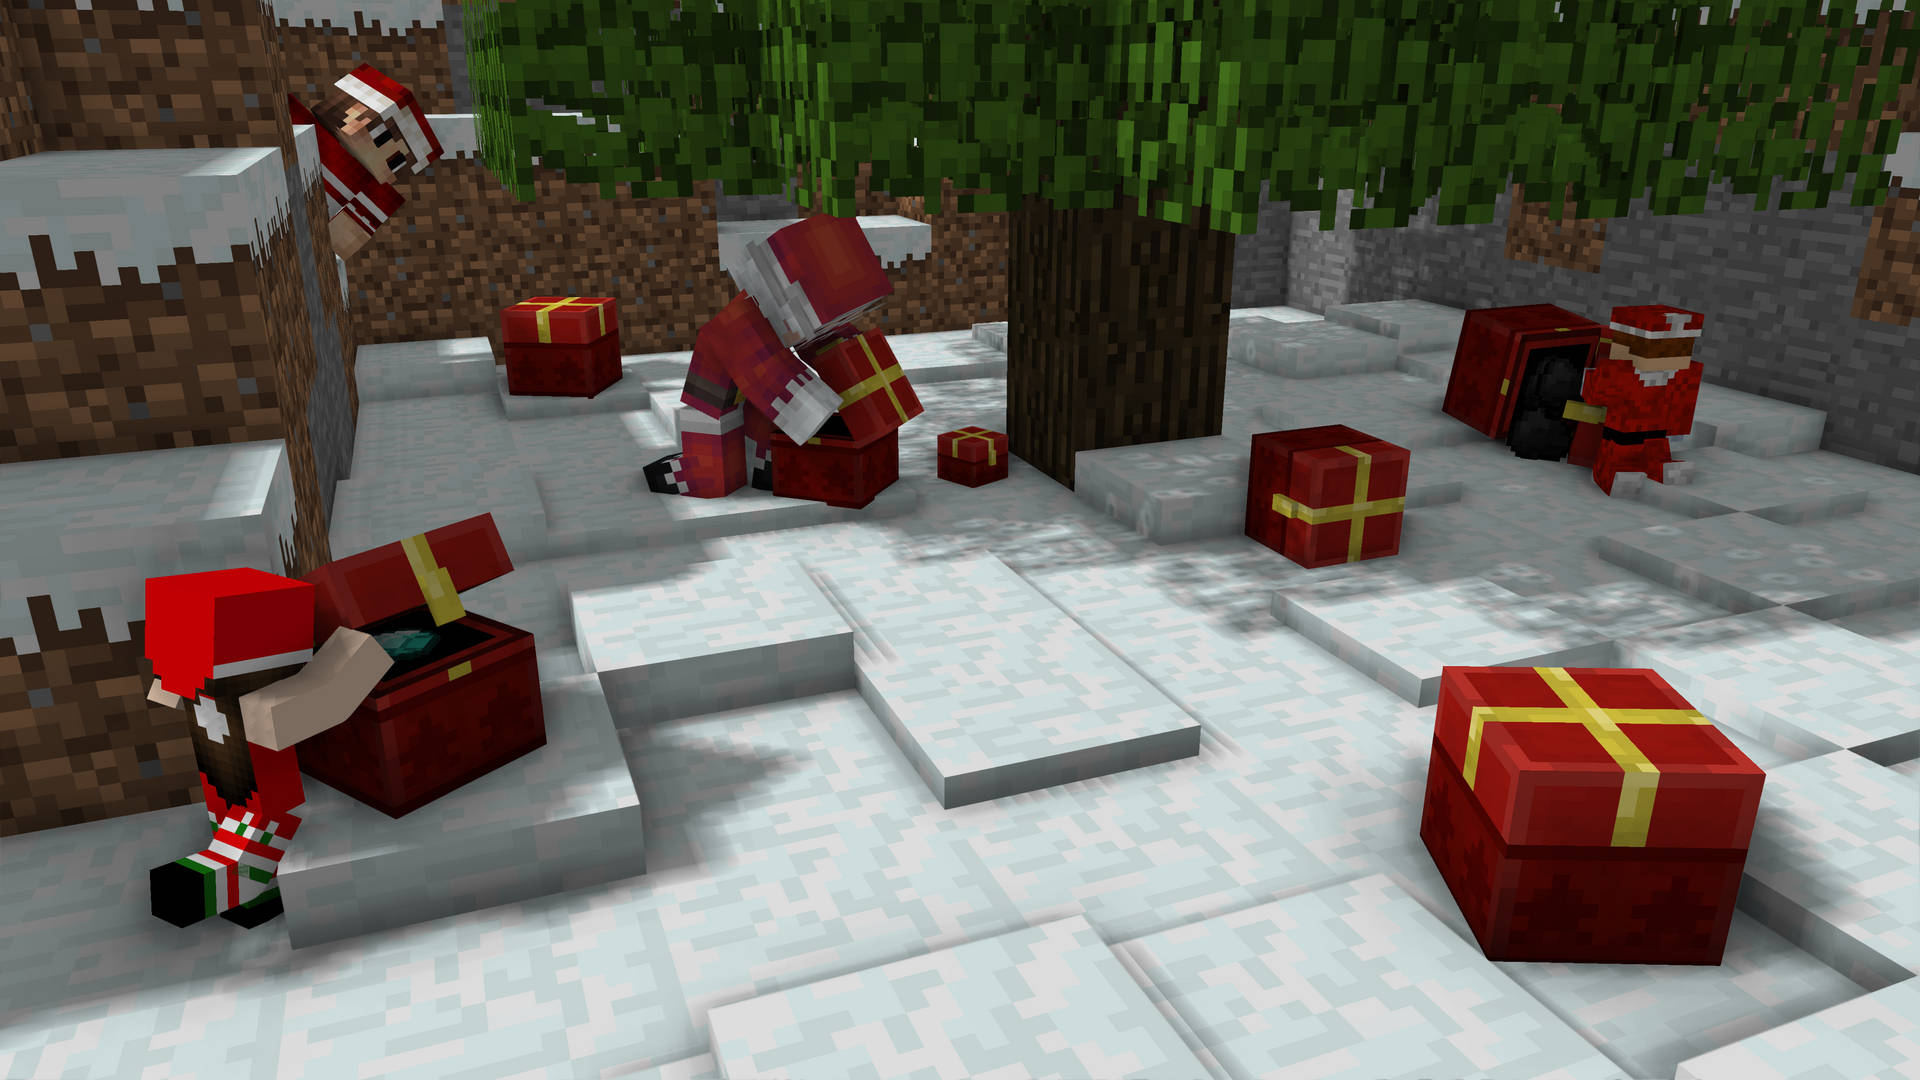 Moving Minecraft Merry Christmas Wallpaper